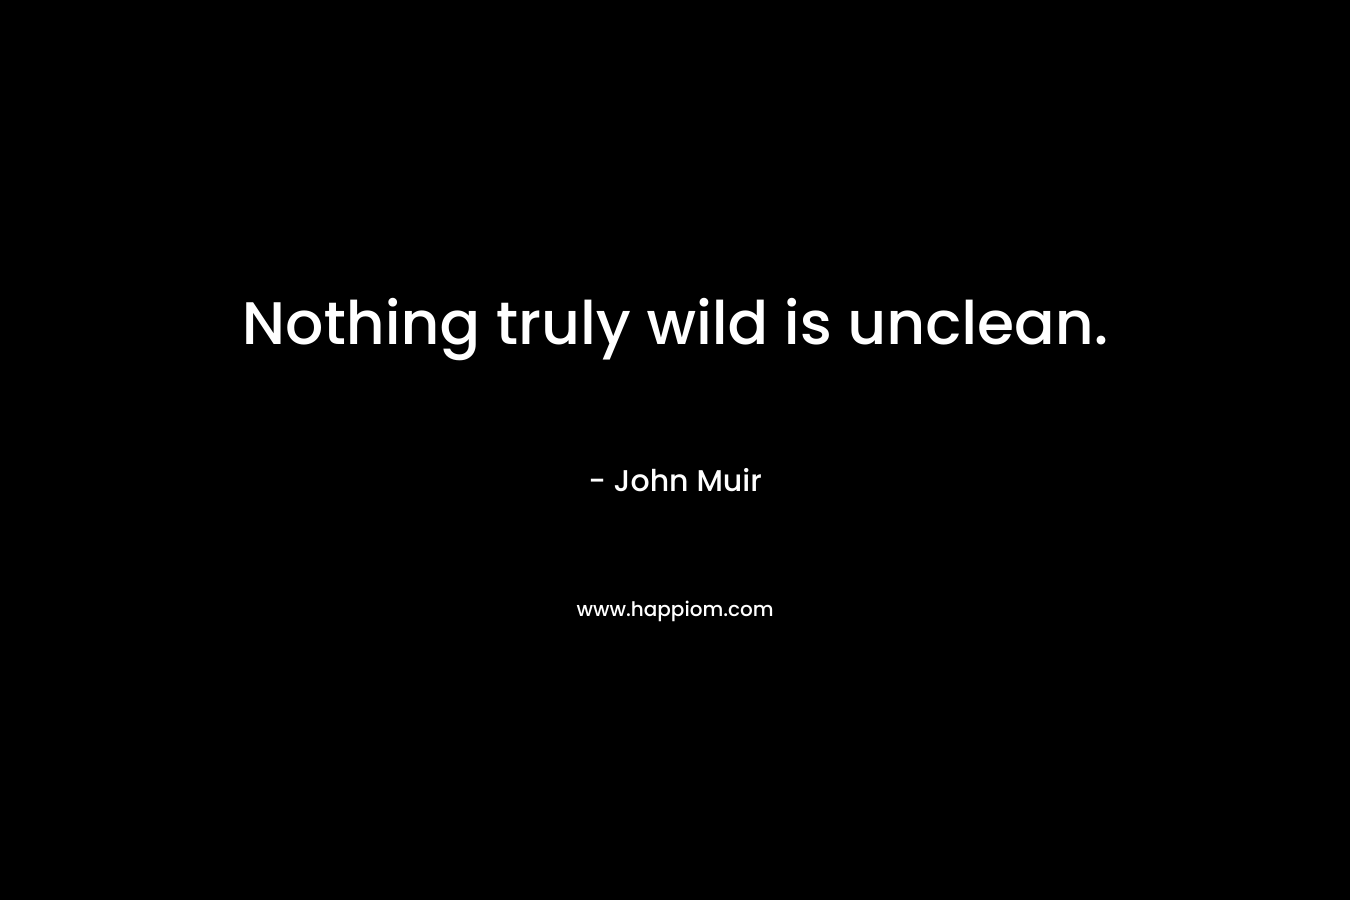 Nothing truly wild is unclean.